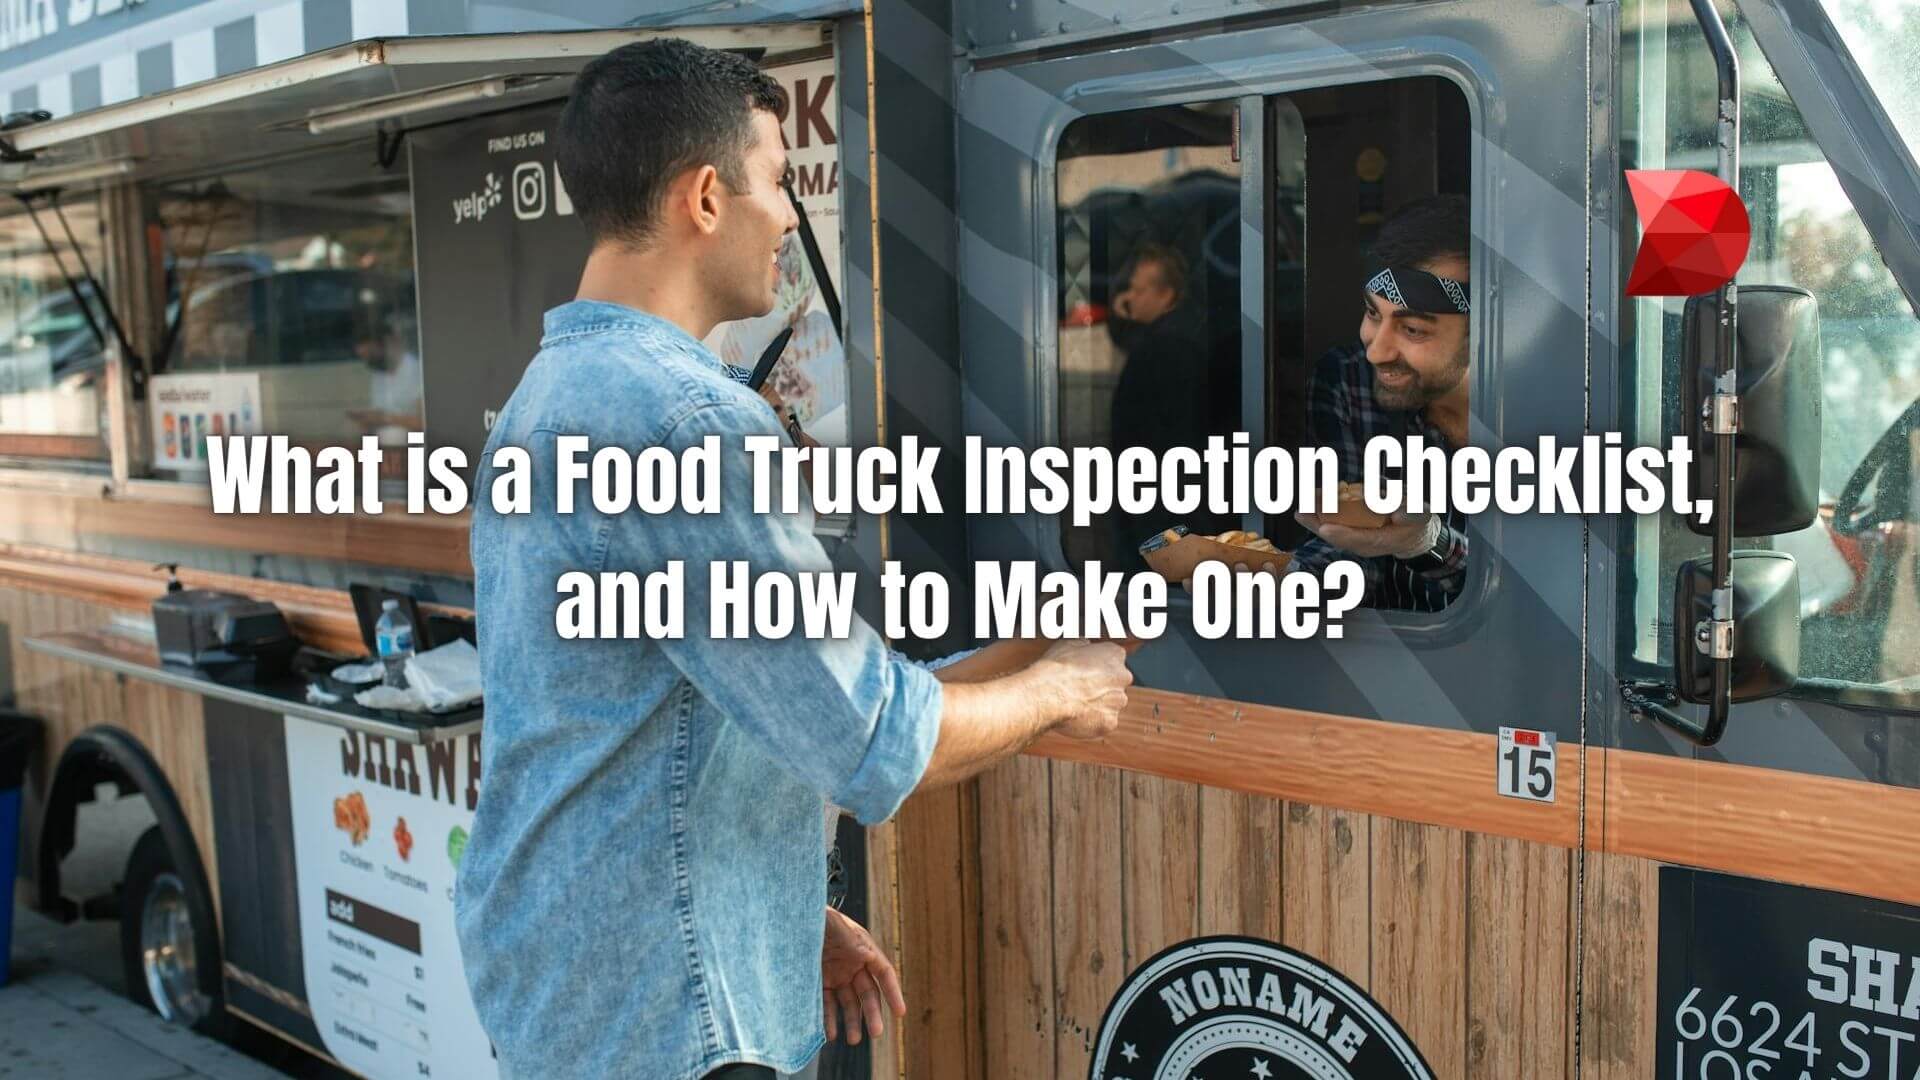 Ensure food truck compliance with our inspection checklist. Click here to learn vital steps for hygiene, safety, and quality assurance.